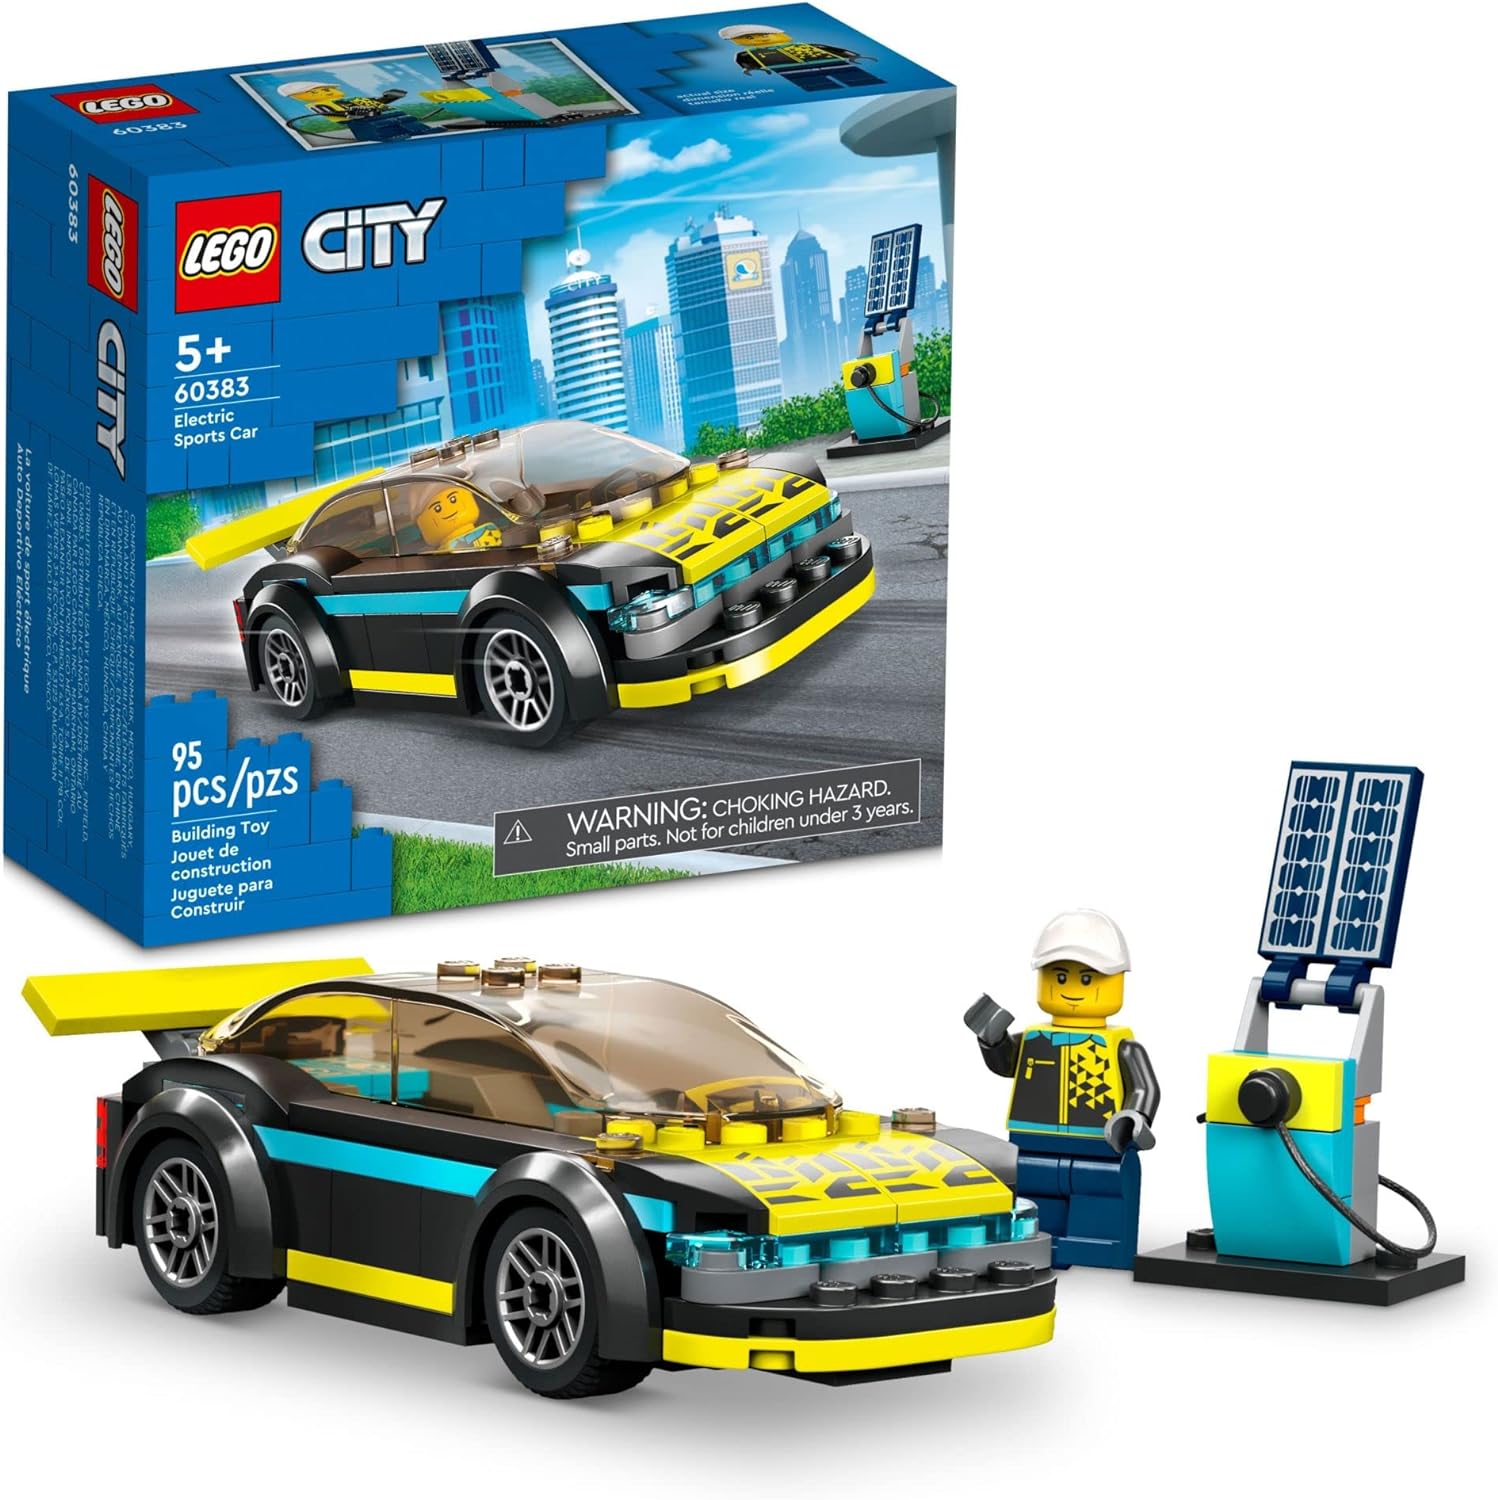 LEGO City Electric Sports Car 60383 Review